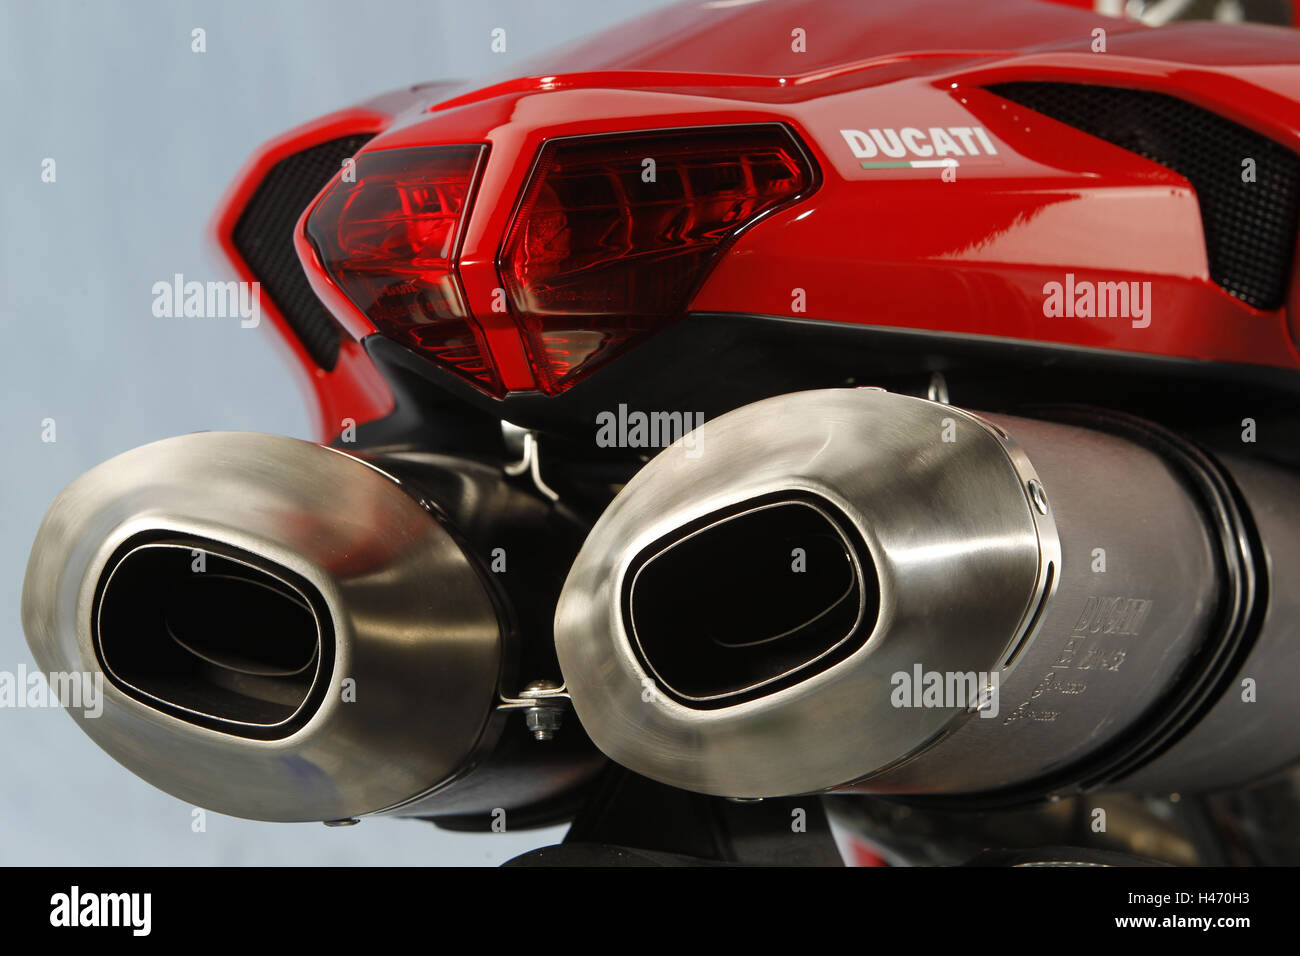 Motorcycle, Ducati in 1198 SP, red, detail, rear, exhaust pipes, studio production, Stock Photo